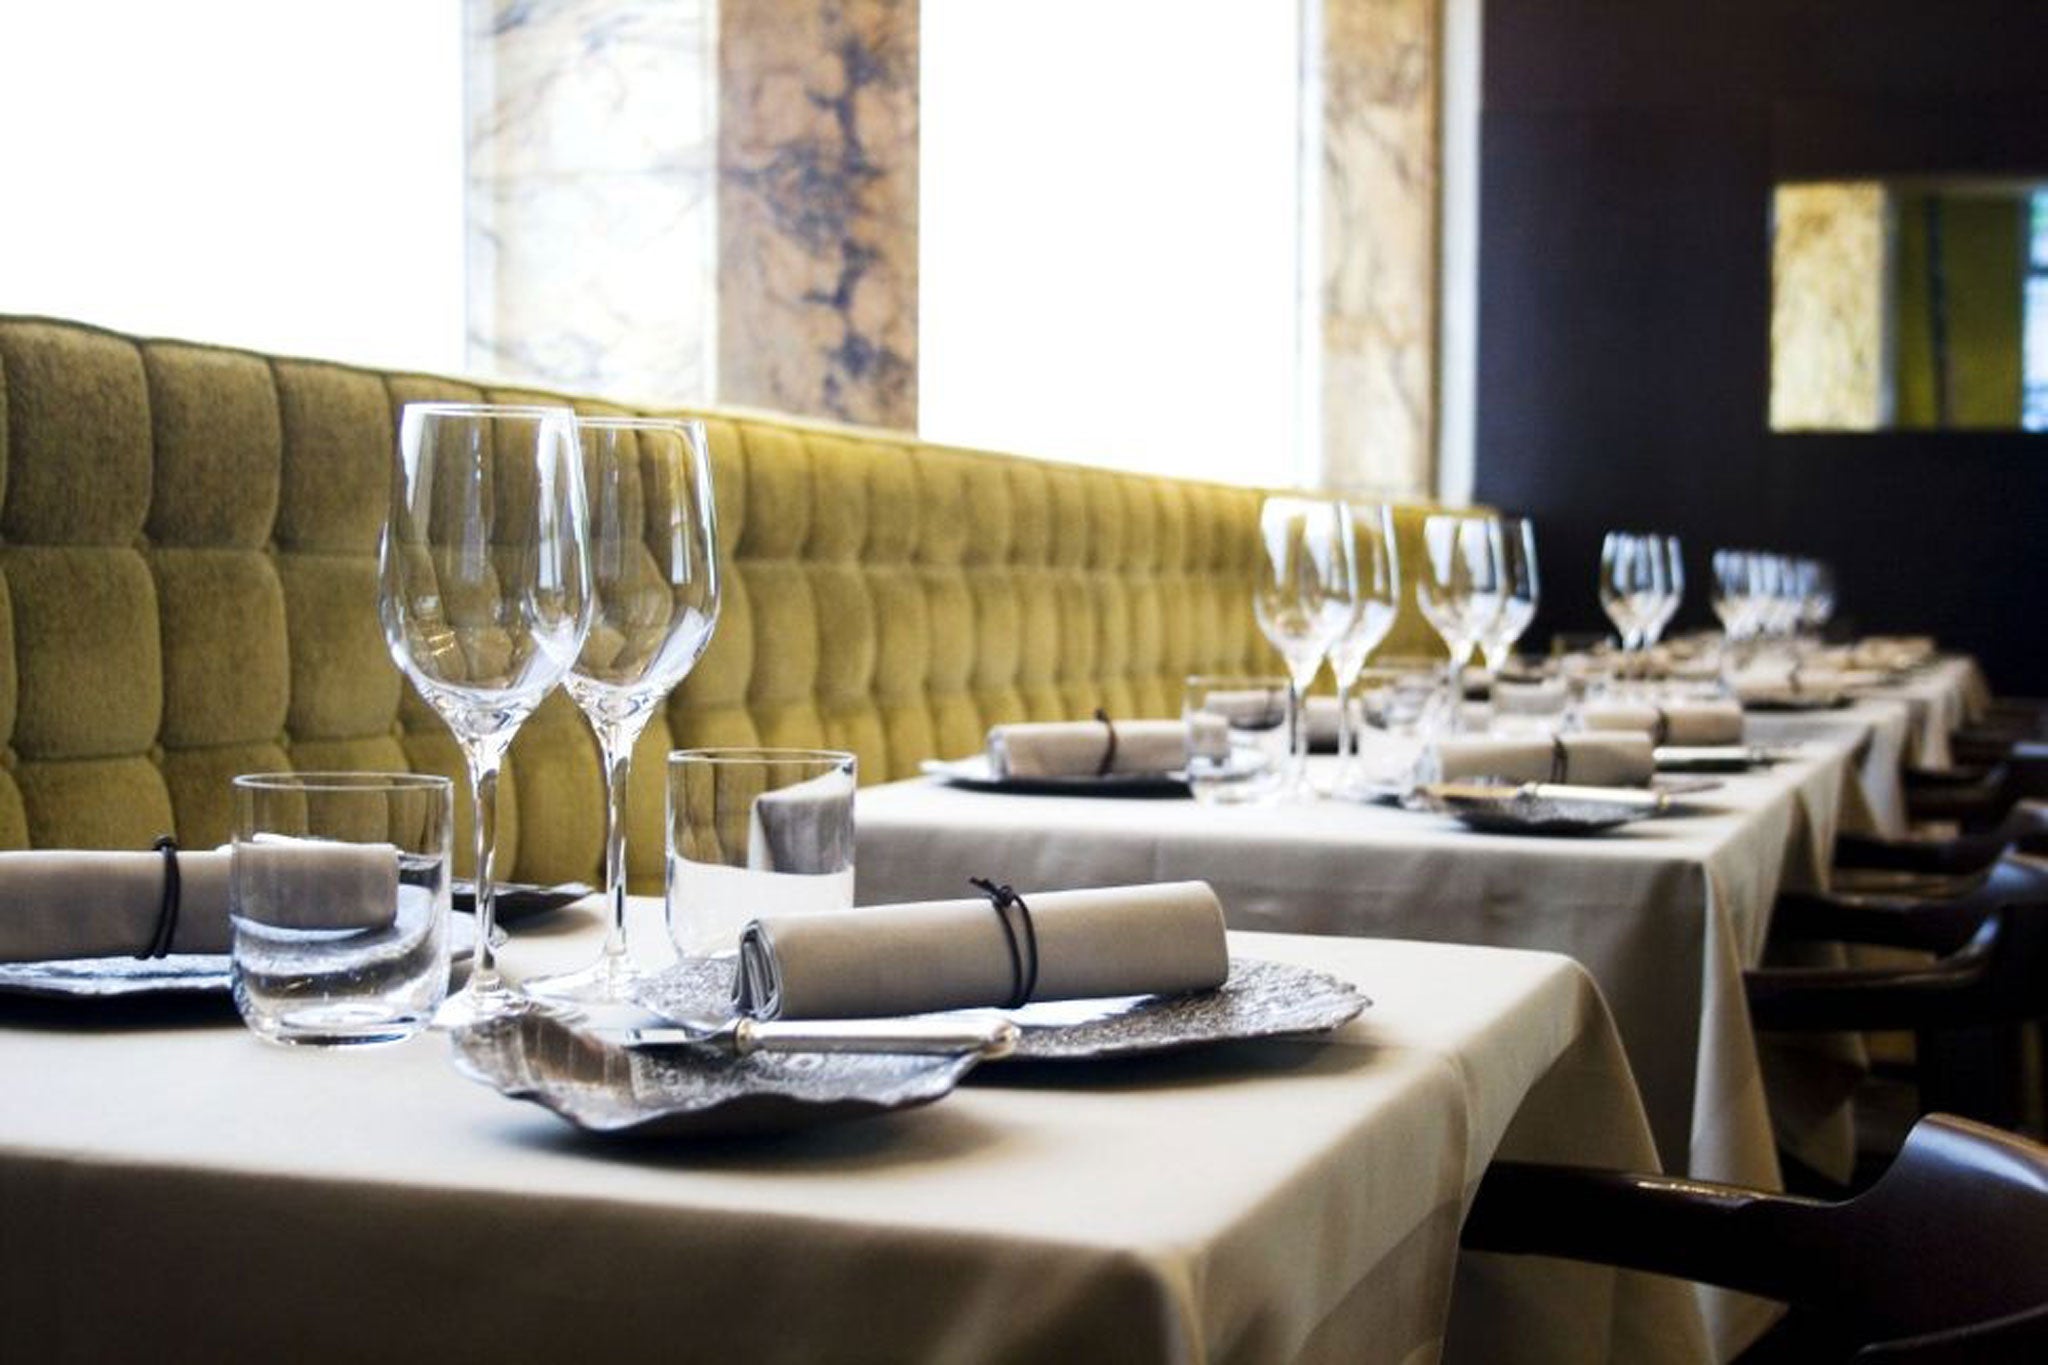 London's Club Gascon is offering four courses for £32.50 per person